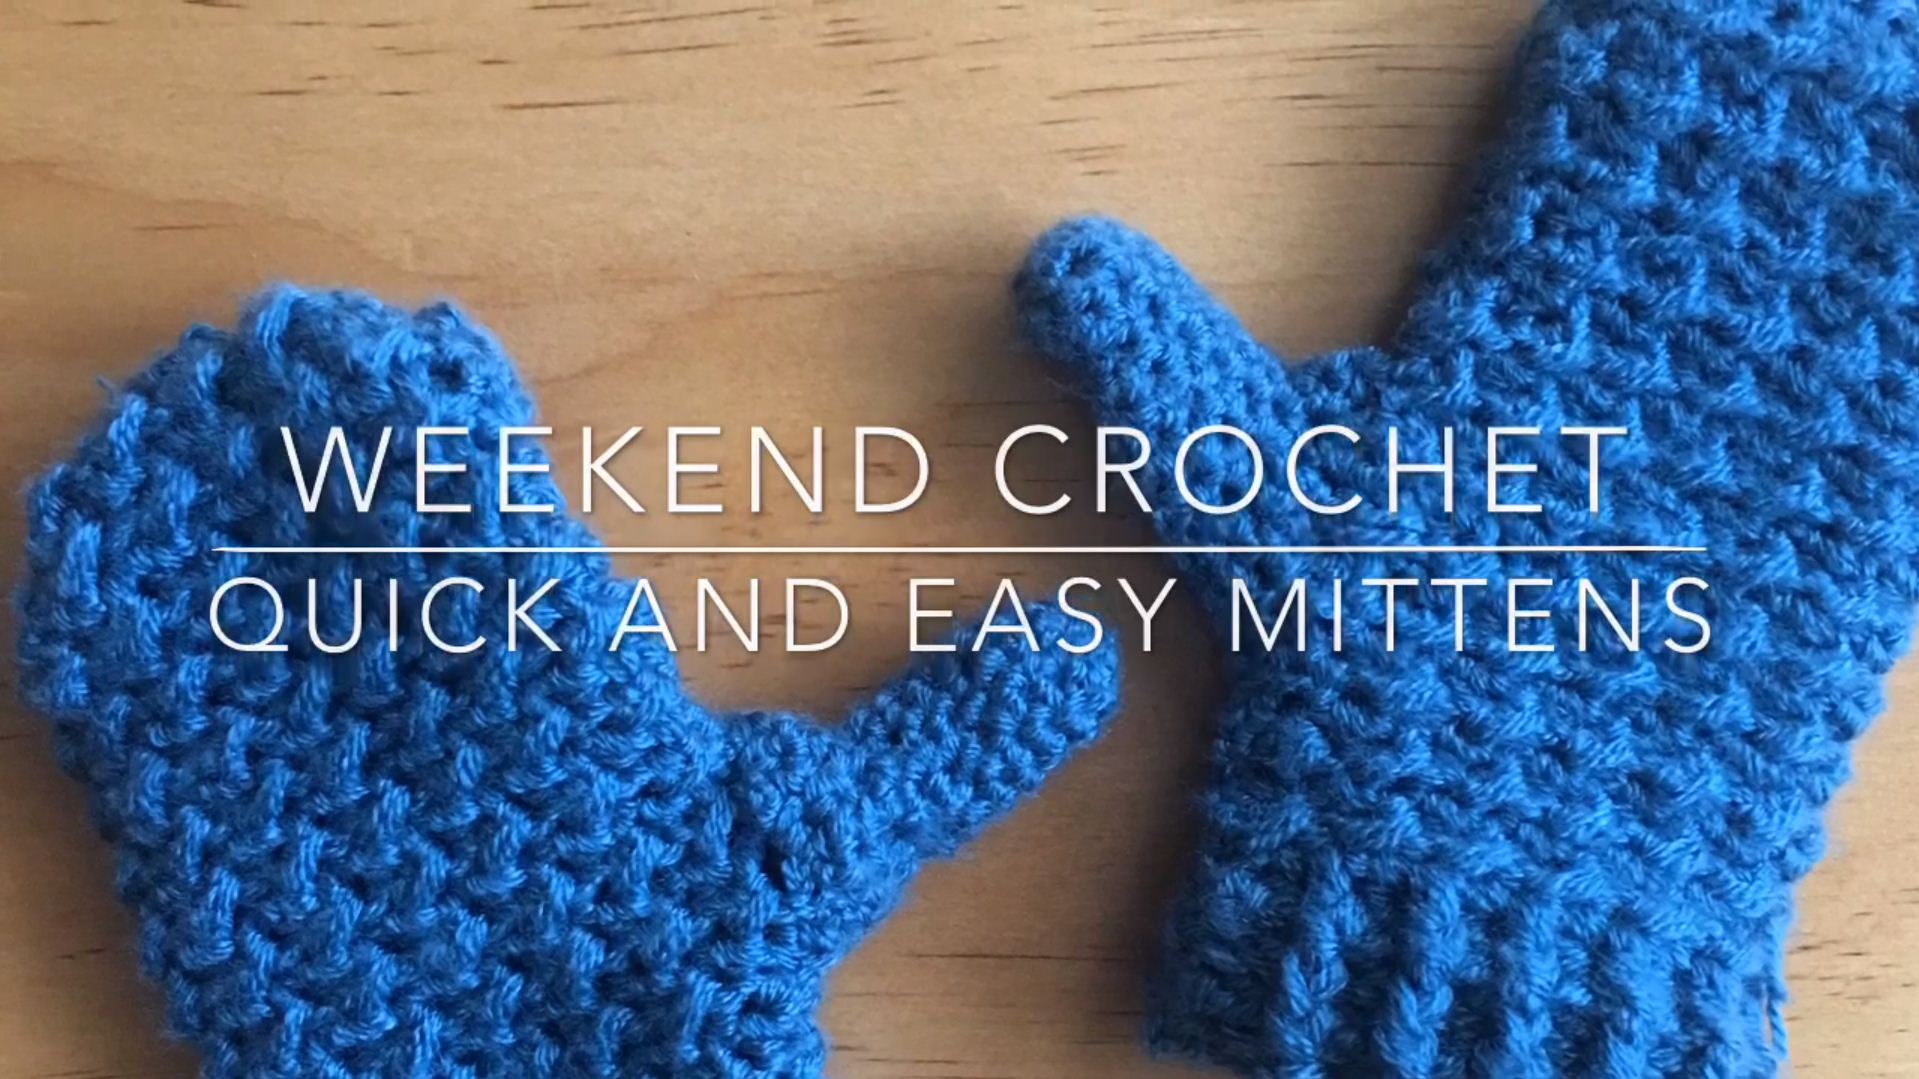 CROCHET QUICK AND EASY MITTENS